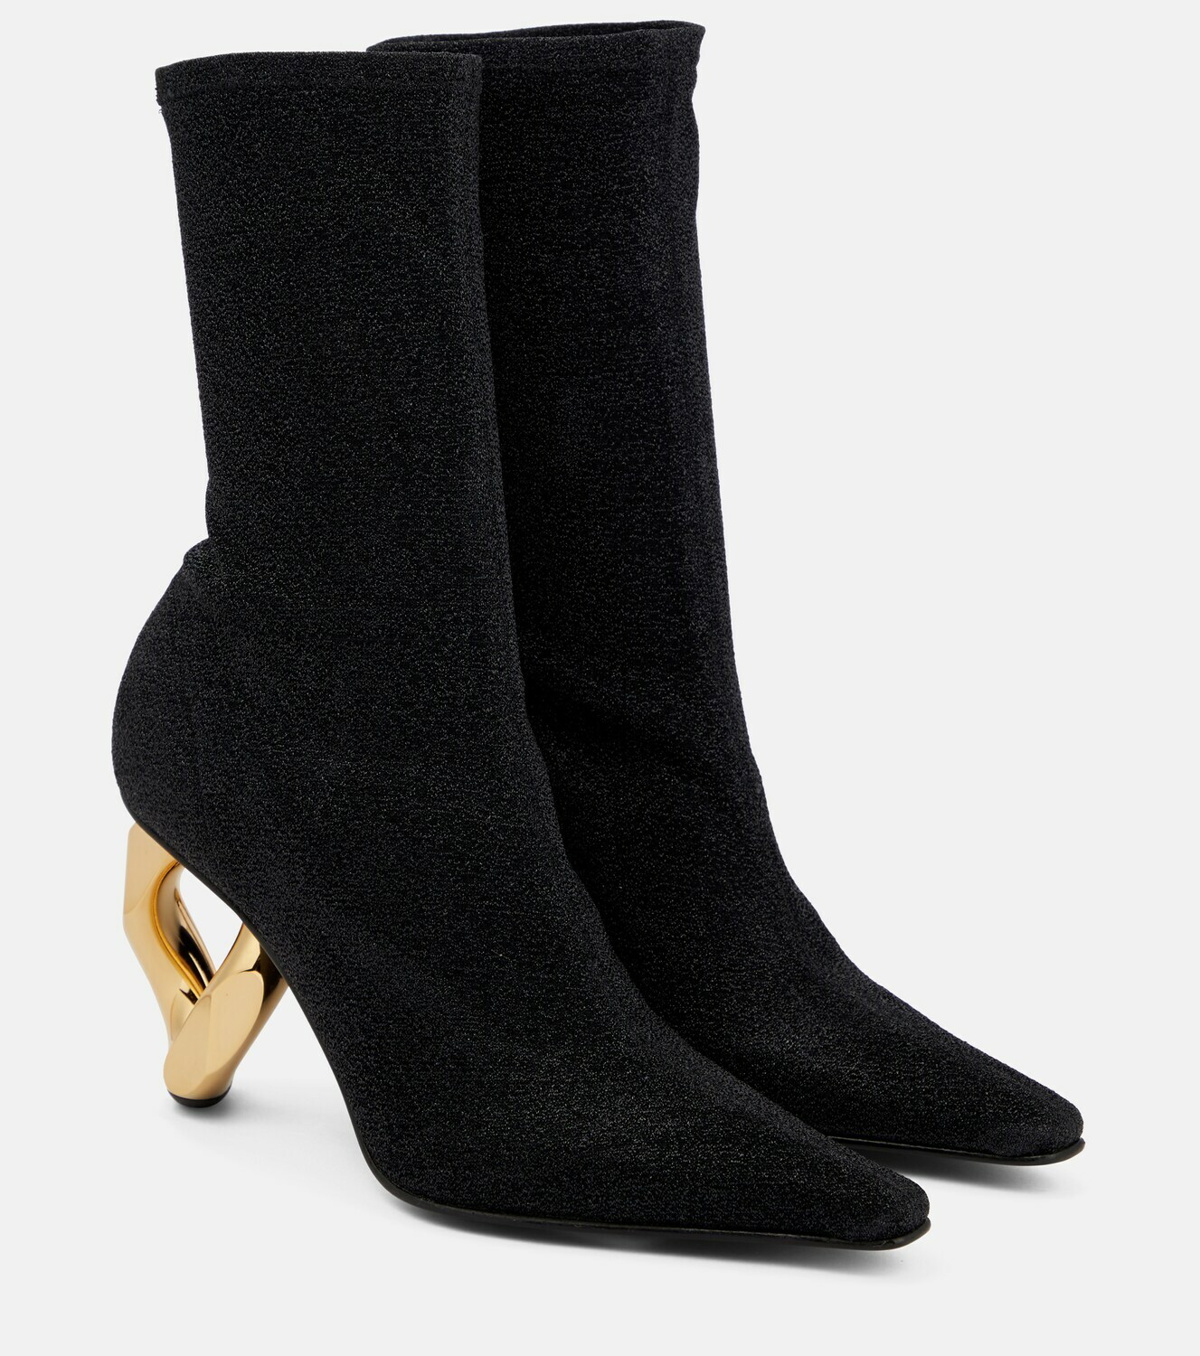 JW Anderson - Chain knit ankle boots JW Anderson